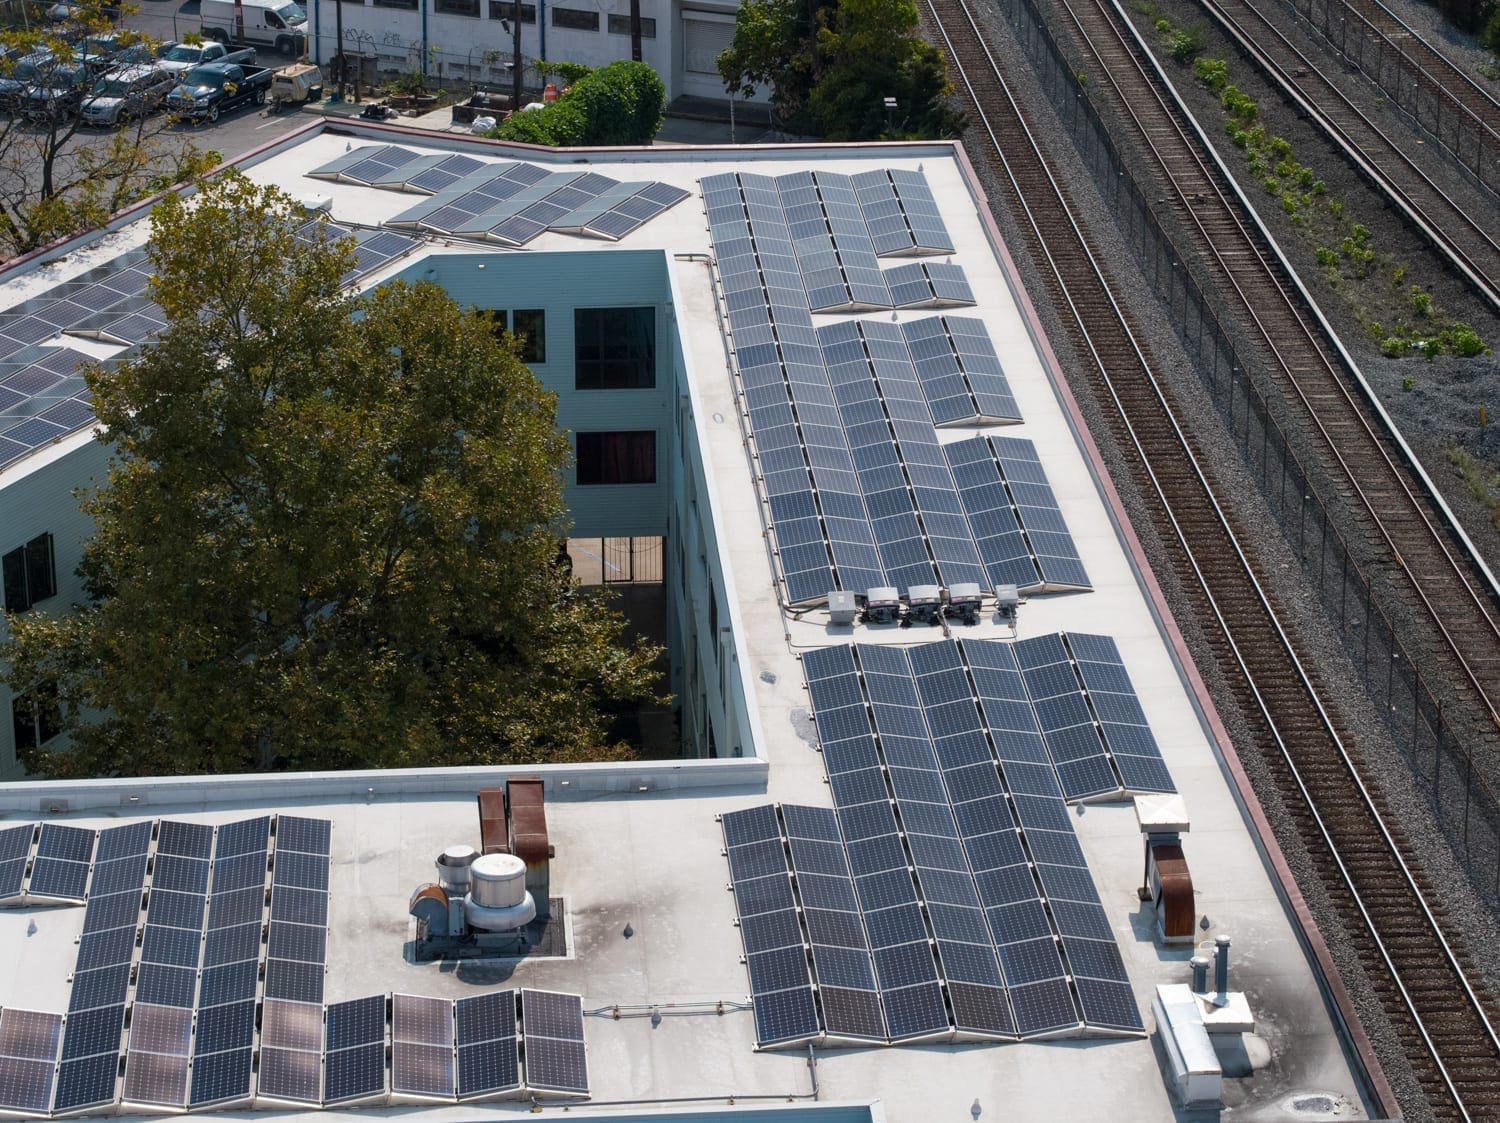 Mixed use commercial solar rooftop array